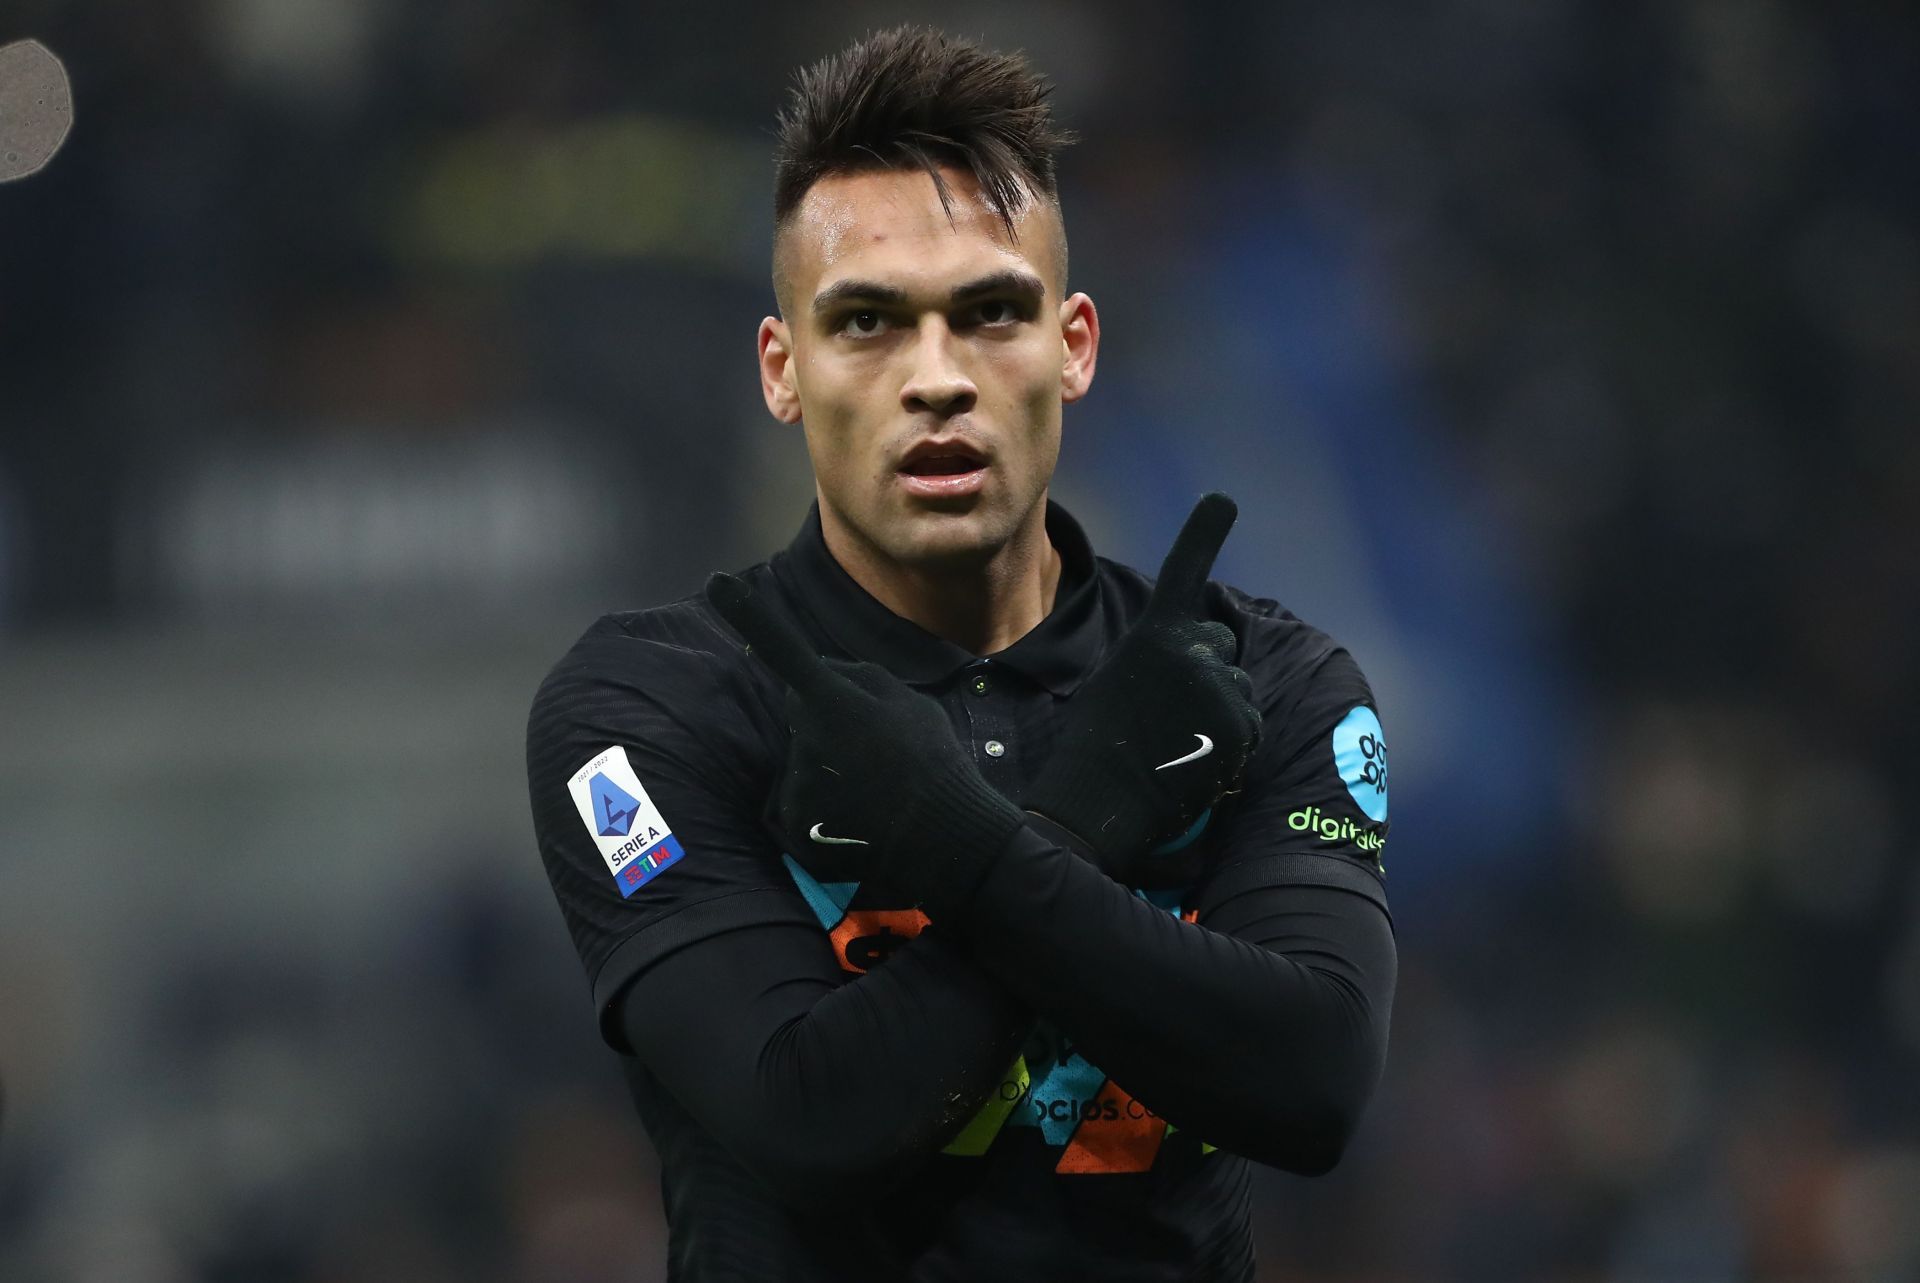 Lautaro Martinez has been a key player for Inter.